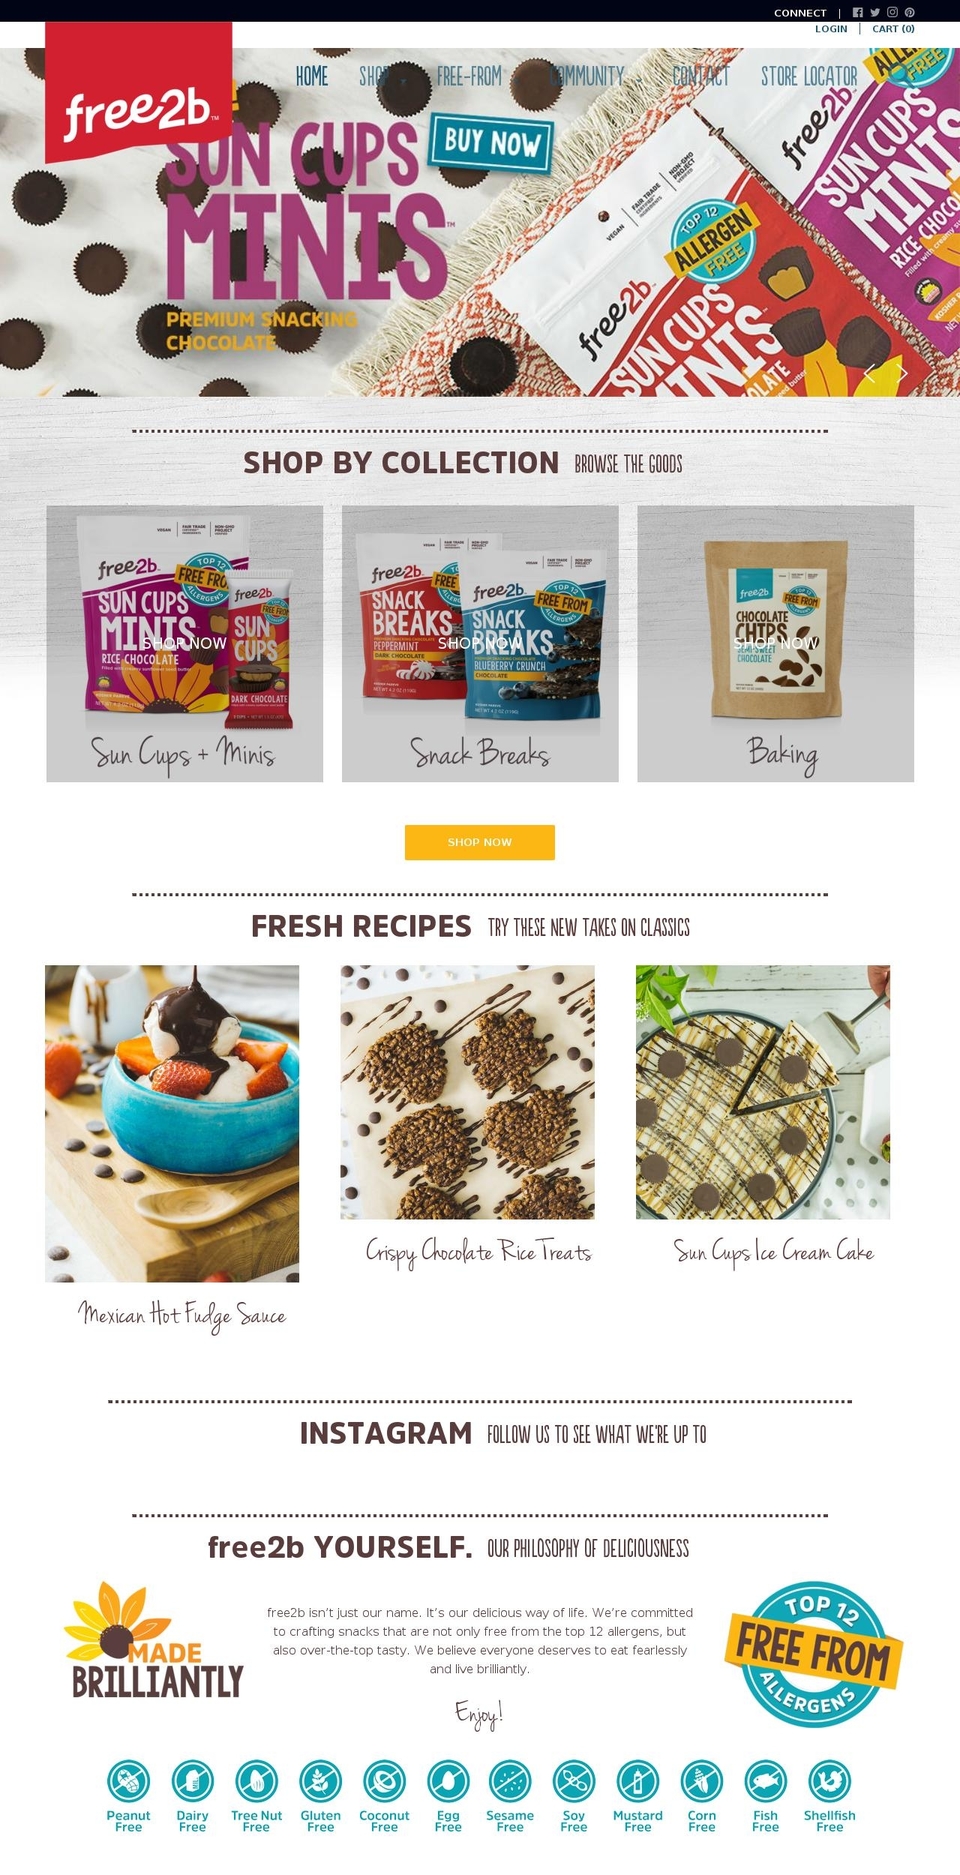 Base Shopify theme site example free2bfoods.com